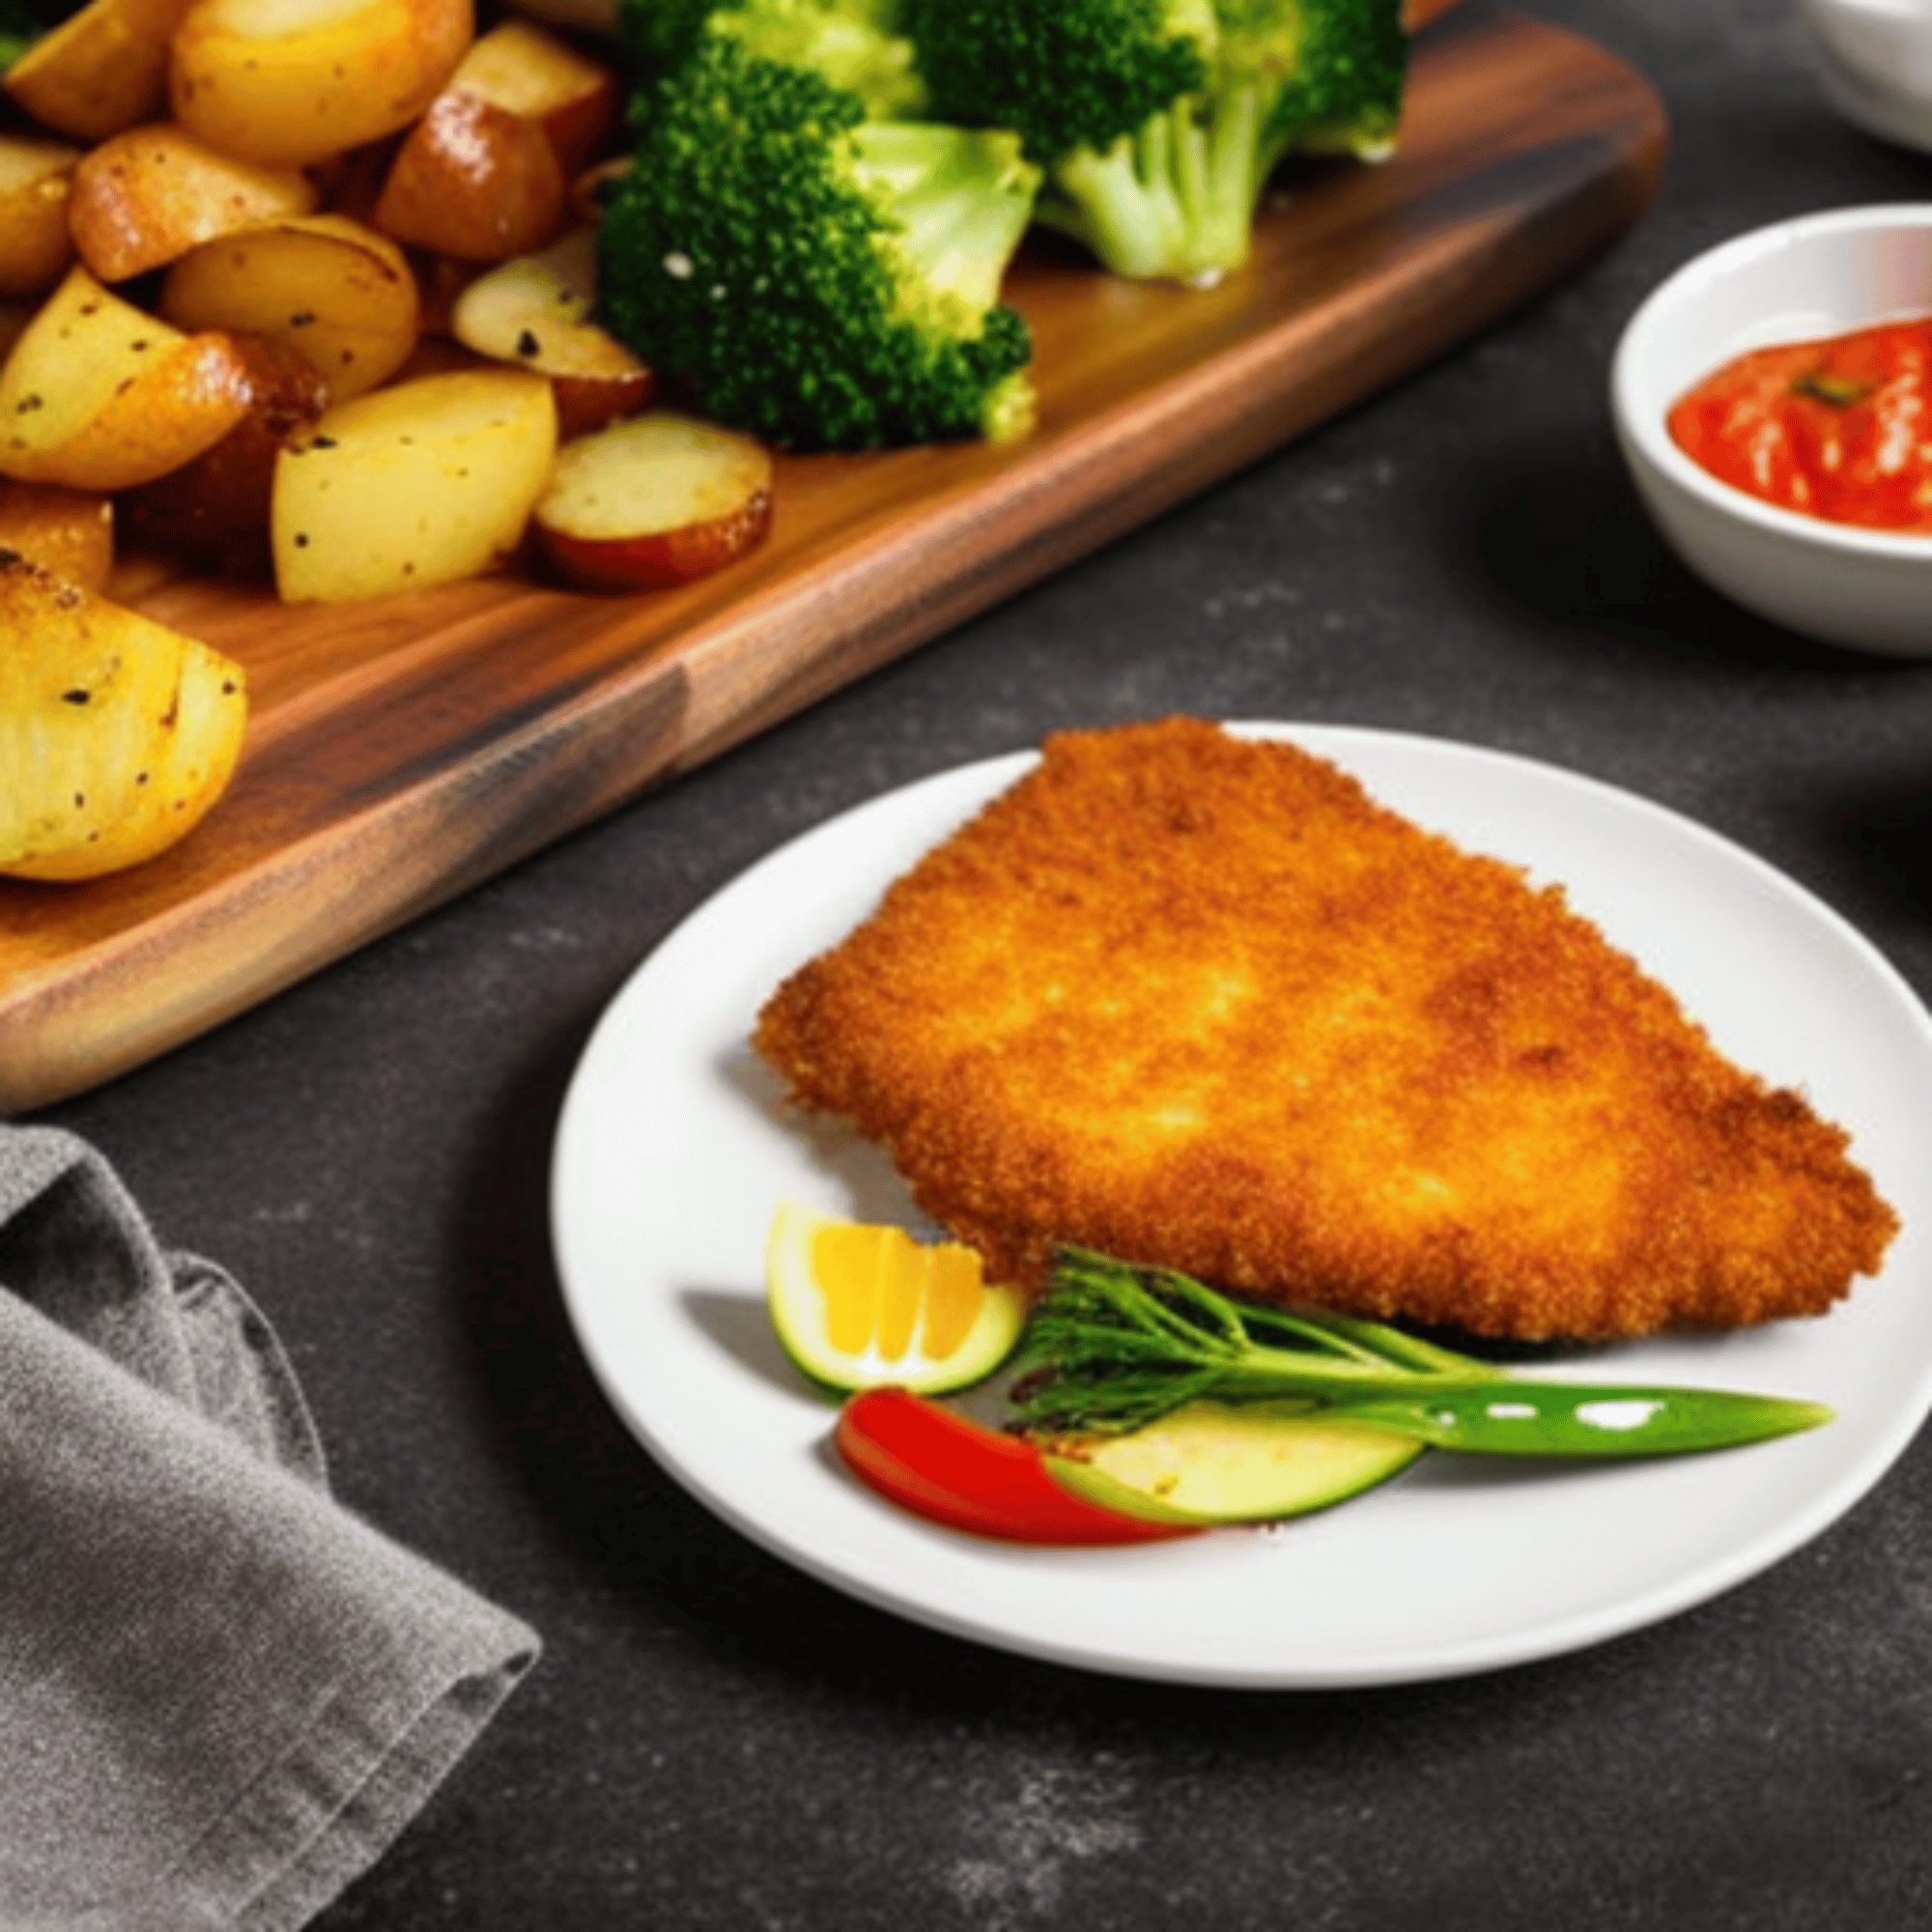 A photo of a plate with a golden, crispy Wiener Schnitzel and a side of potatoes and vegetables.